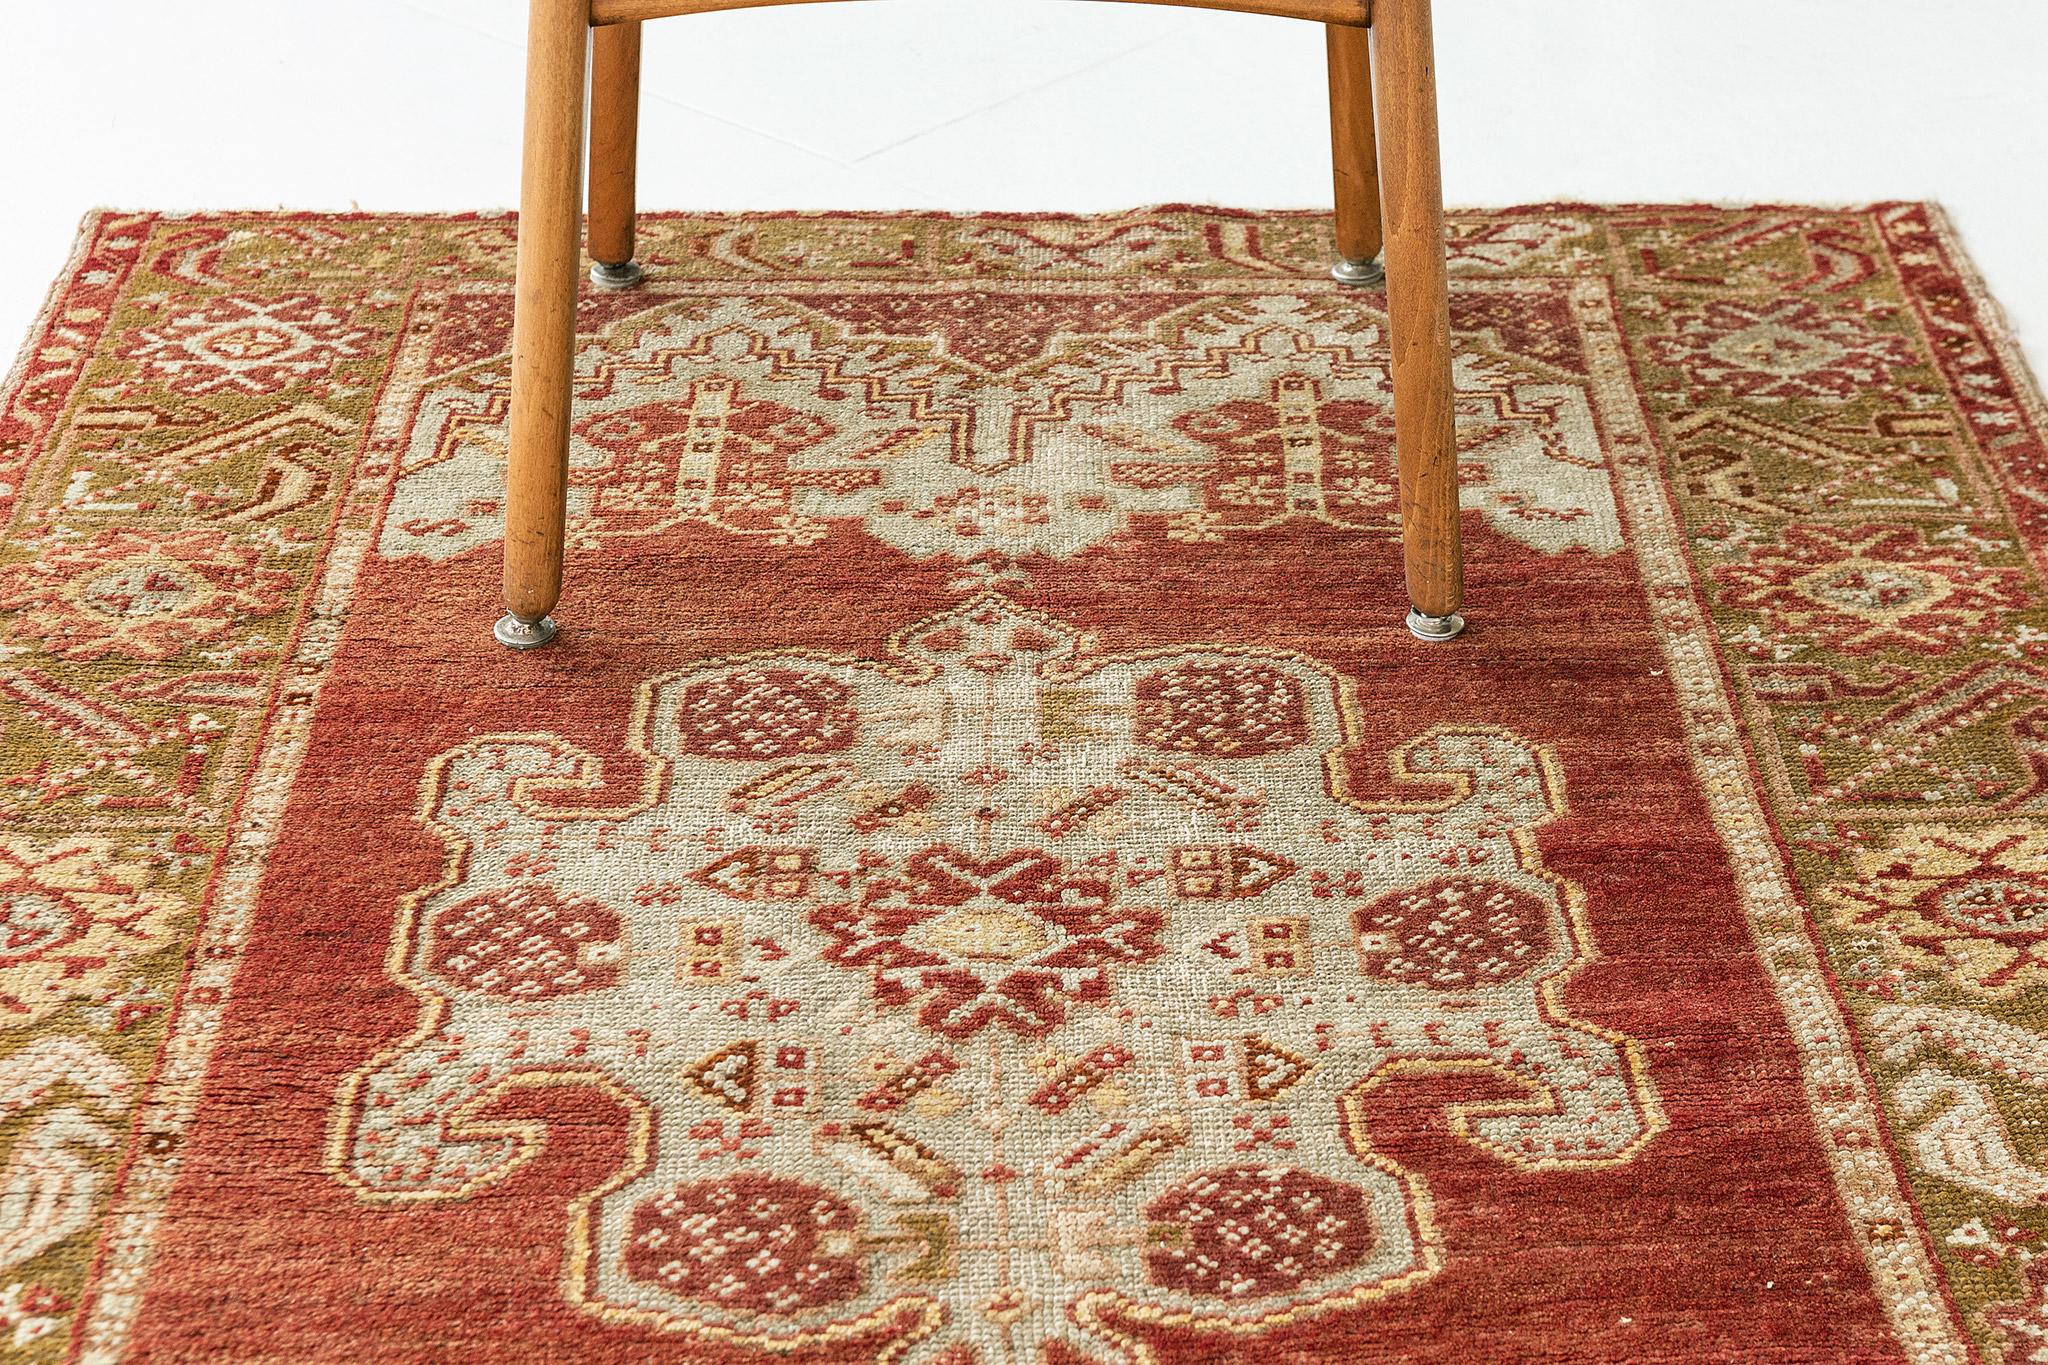 A phenomenal antique Turkish Anatolian rug that has a classic and timeless pattern. Featuring the collaboration of warm and vibrant tones of terracotta, moss green and ecru, this classy rug is composed with enchanting graceful herati motifs,